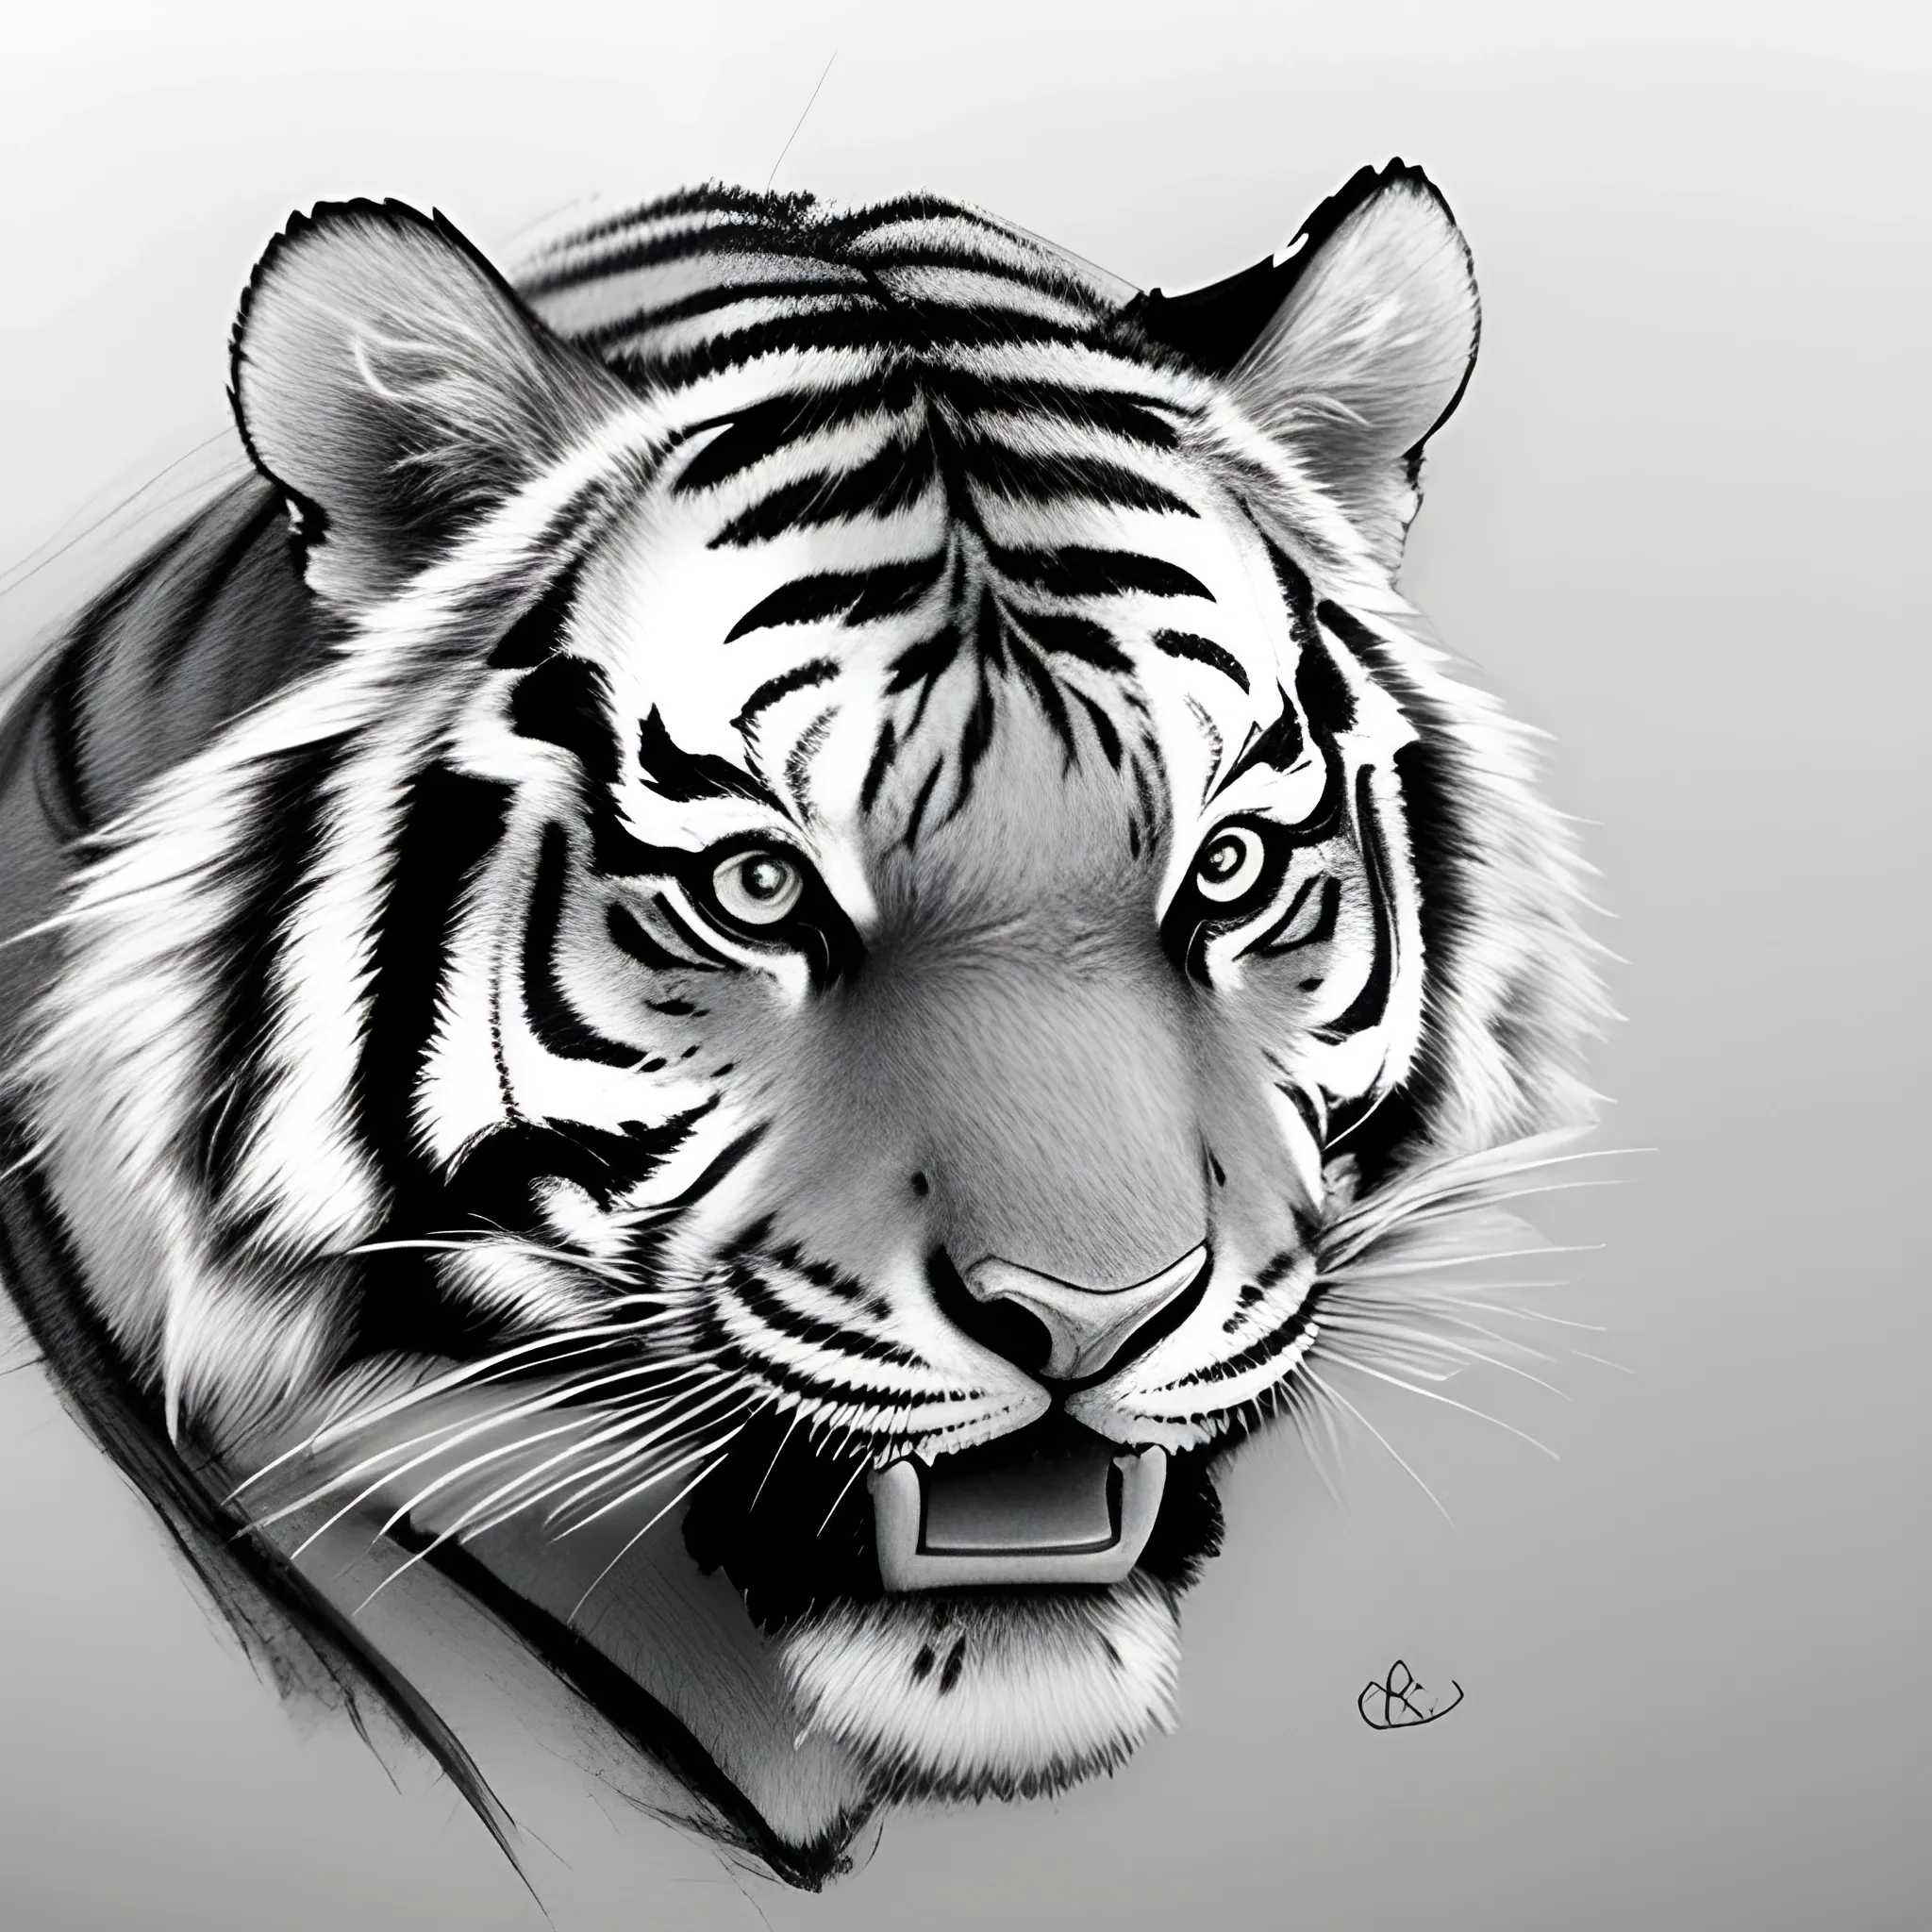 FREE International Tiger Day Templates & Examples - Edit Online & Download  | Template.net